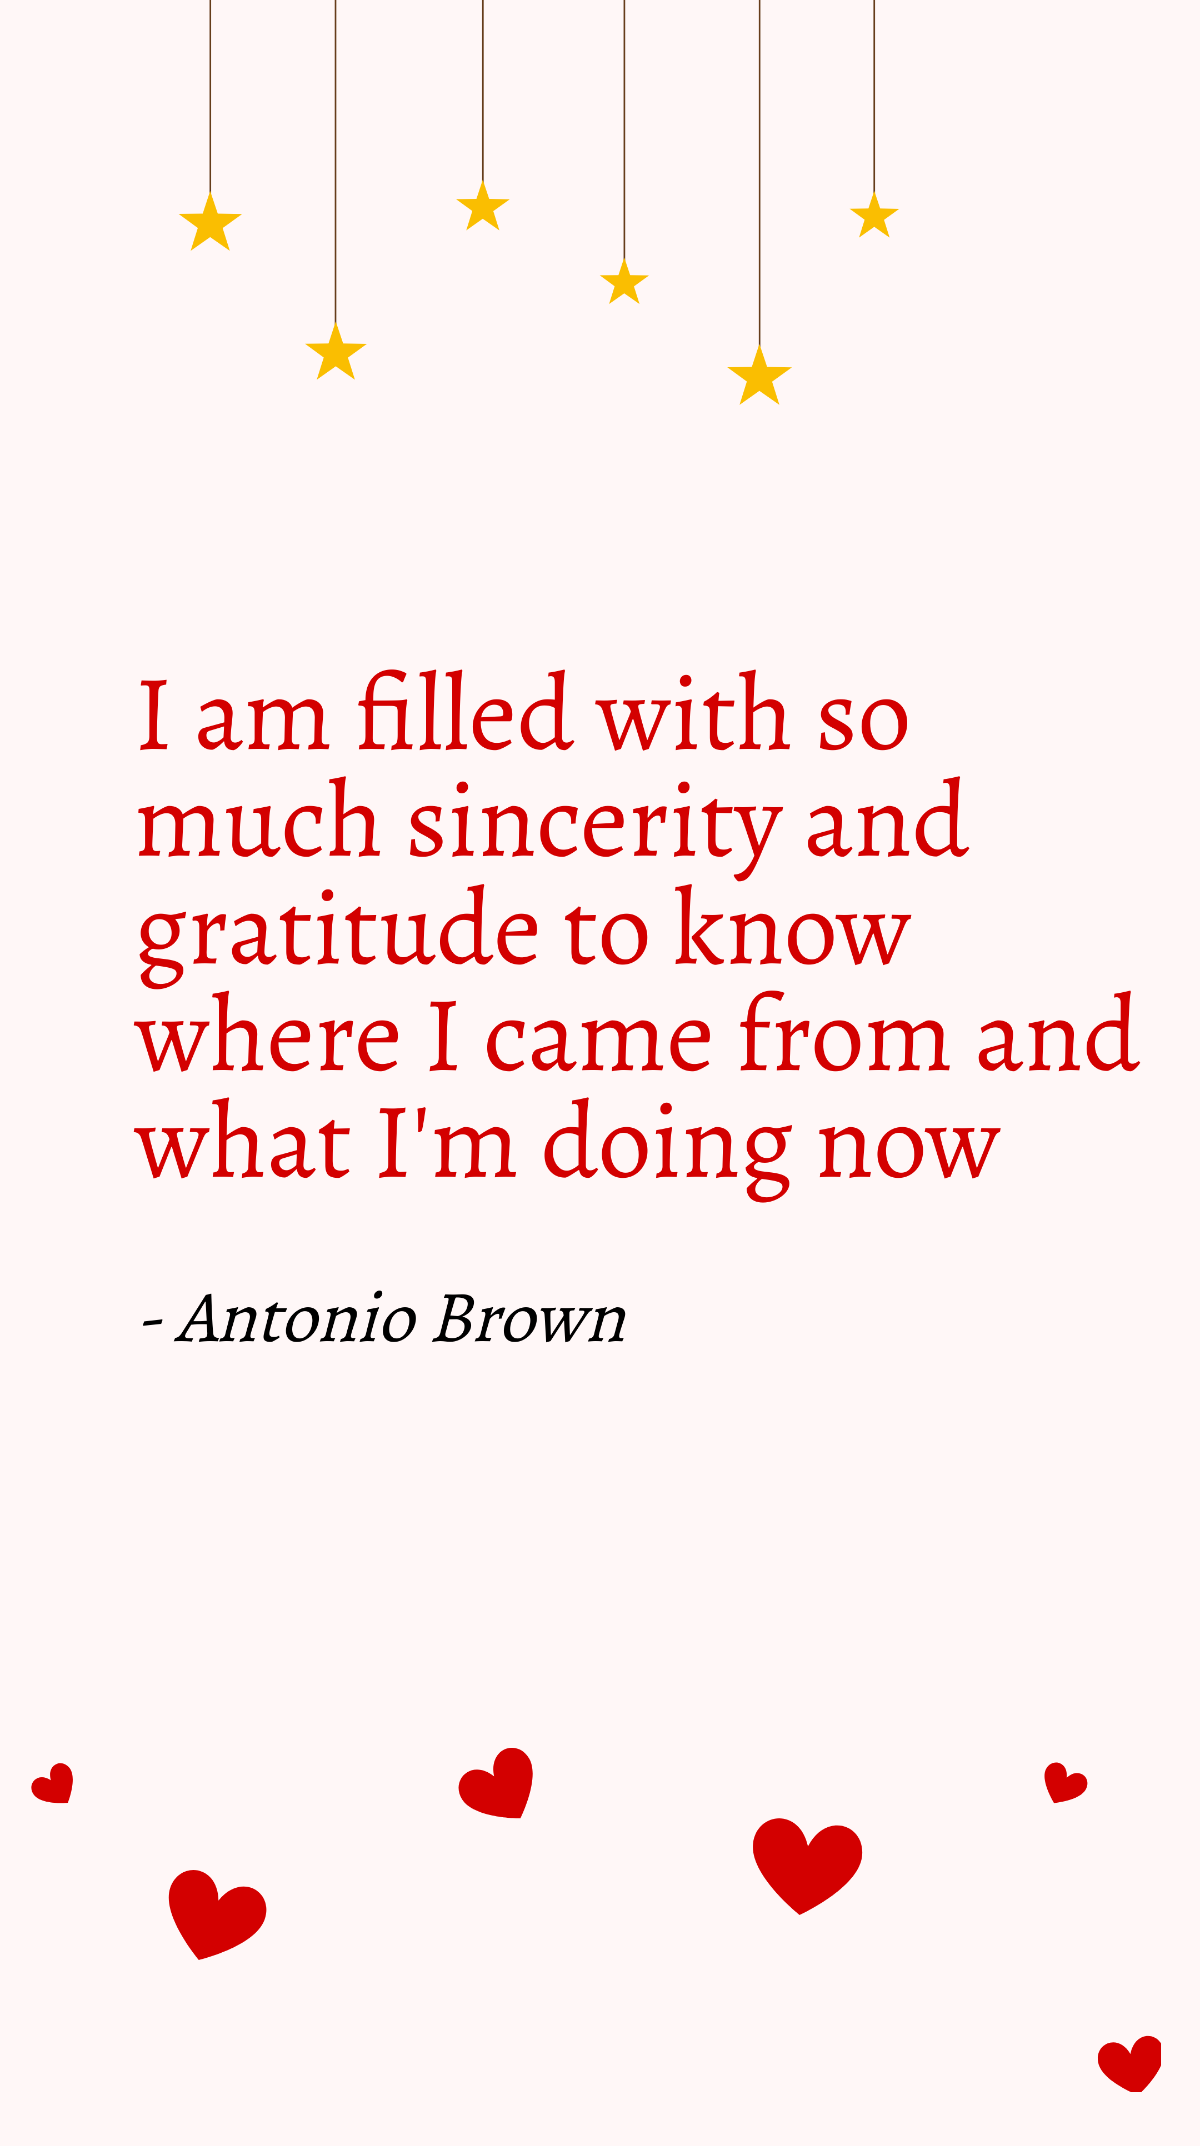 Antonio Brown- I am filled with so much sincerity and gratitude to know where I came from and what I'm doing now